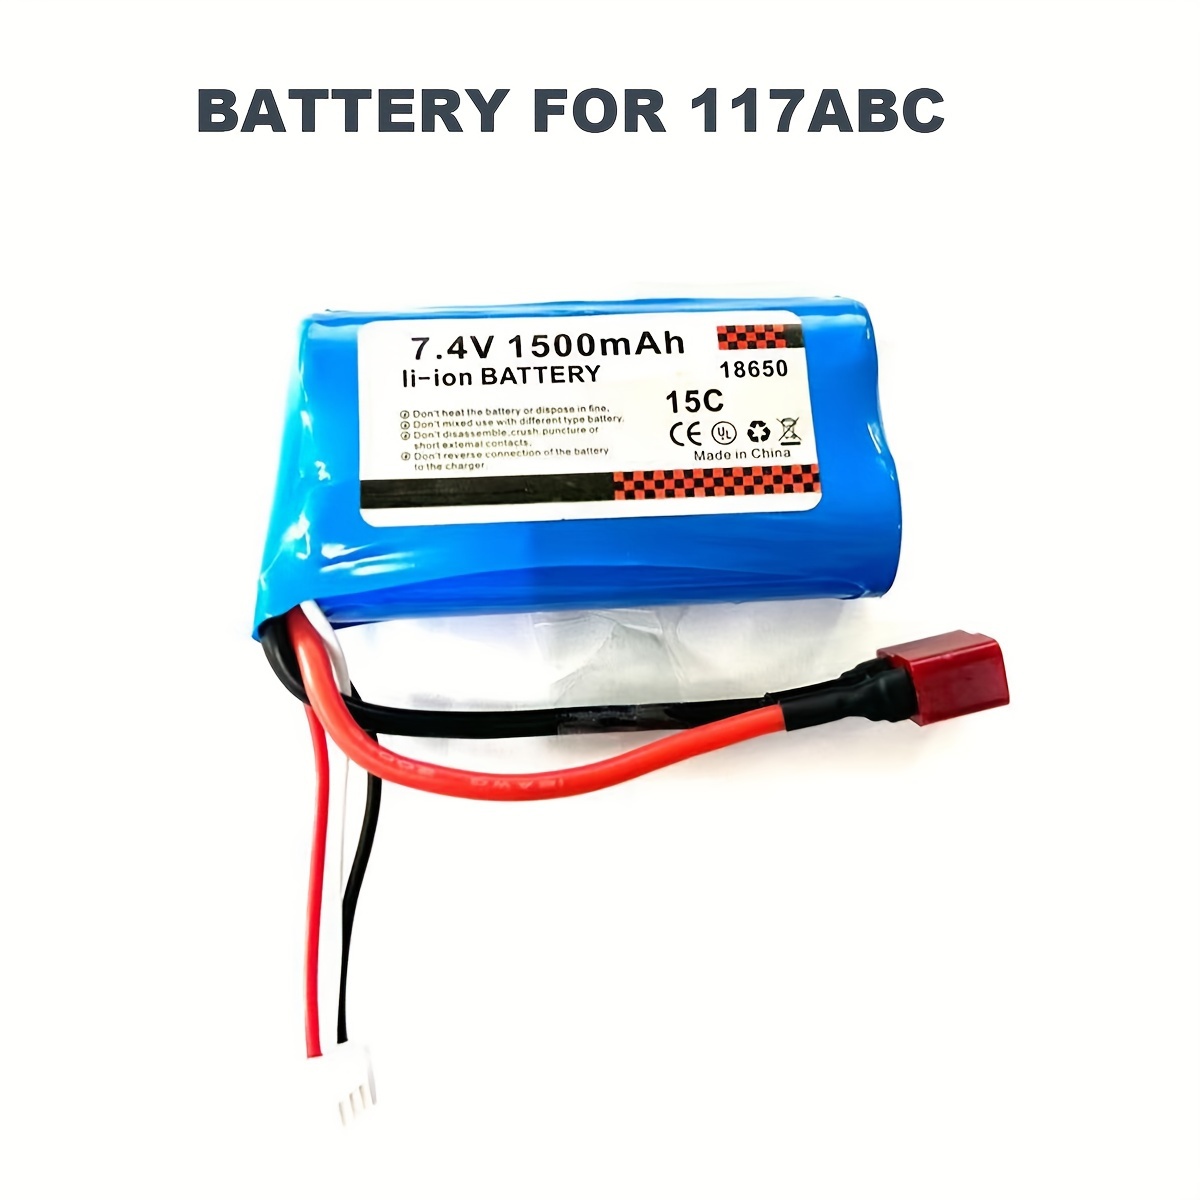 PCEONAMP 7.4V Li-ion Battery 2000mAh 2S Battery with SM-2P Plug  Rechargeable High Capacity RC Battery Fit for MN D90/91, MN 99/99s RC Cars,  H101 H103